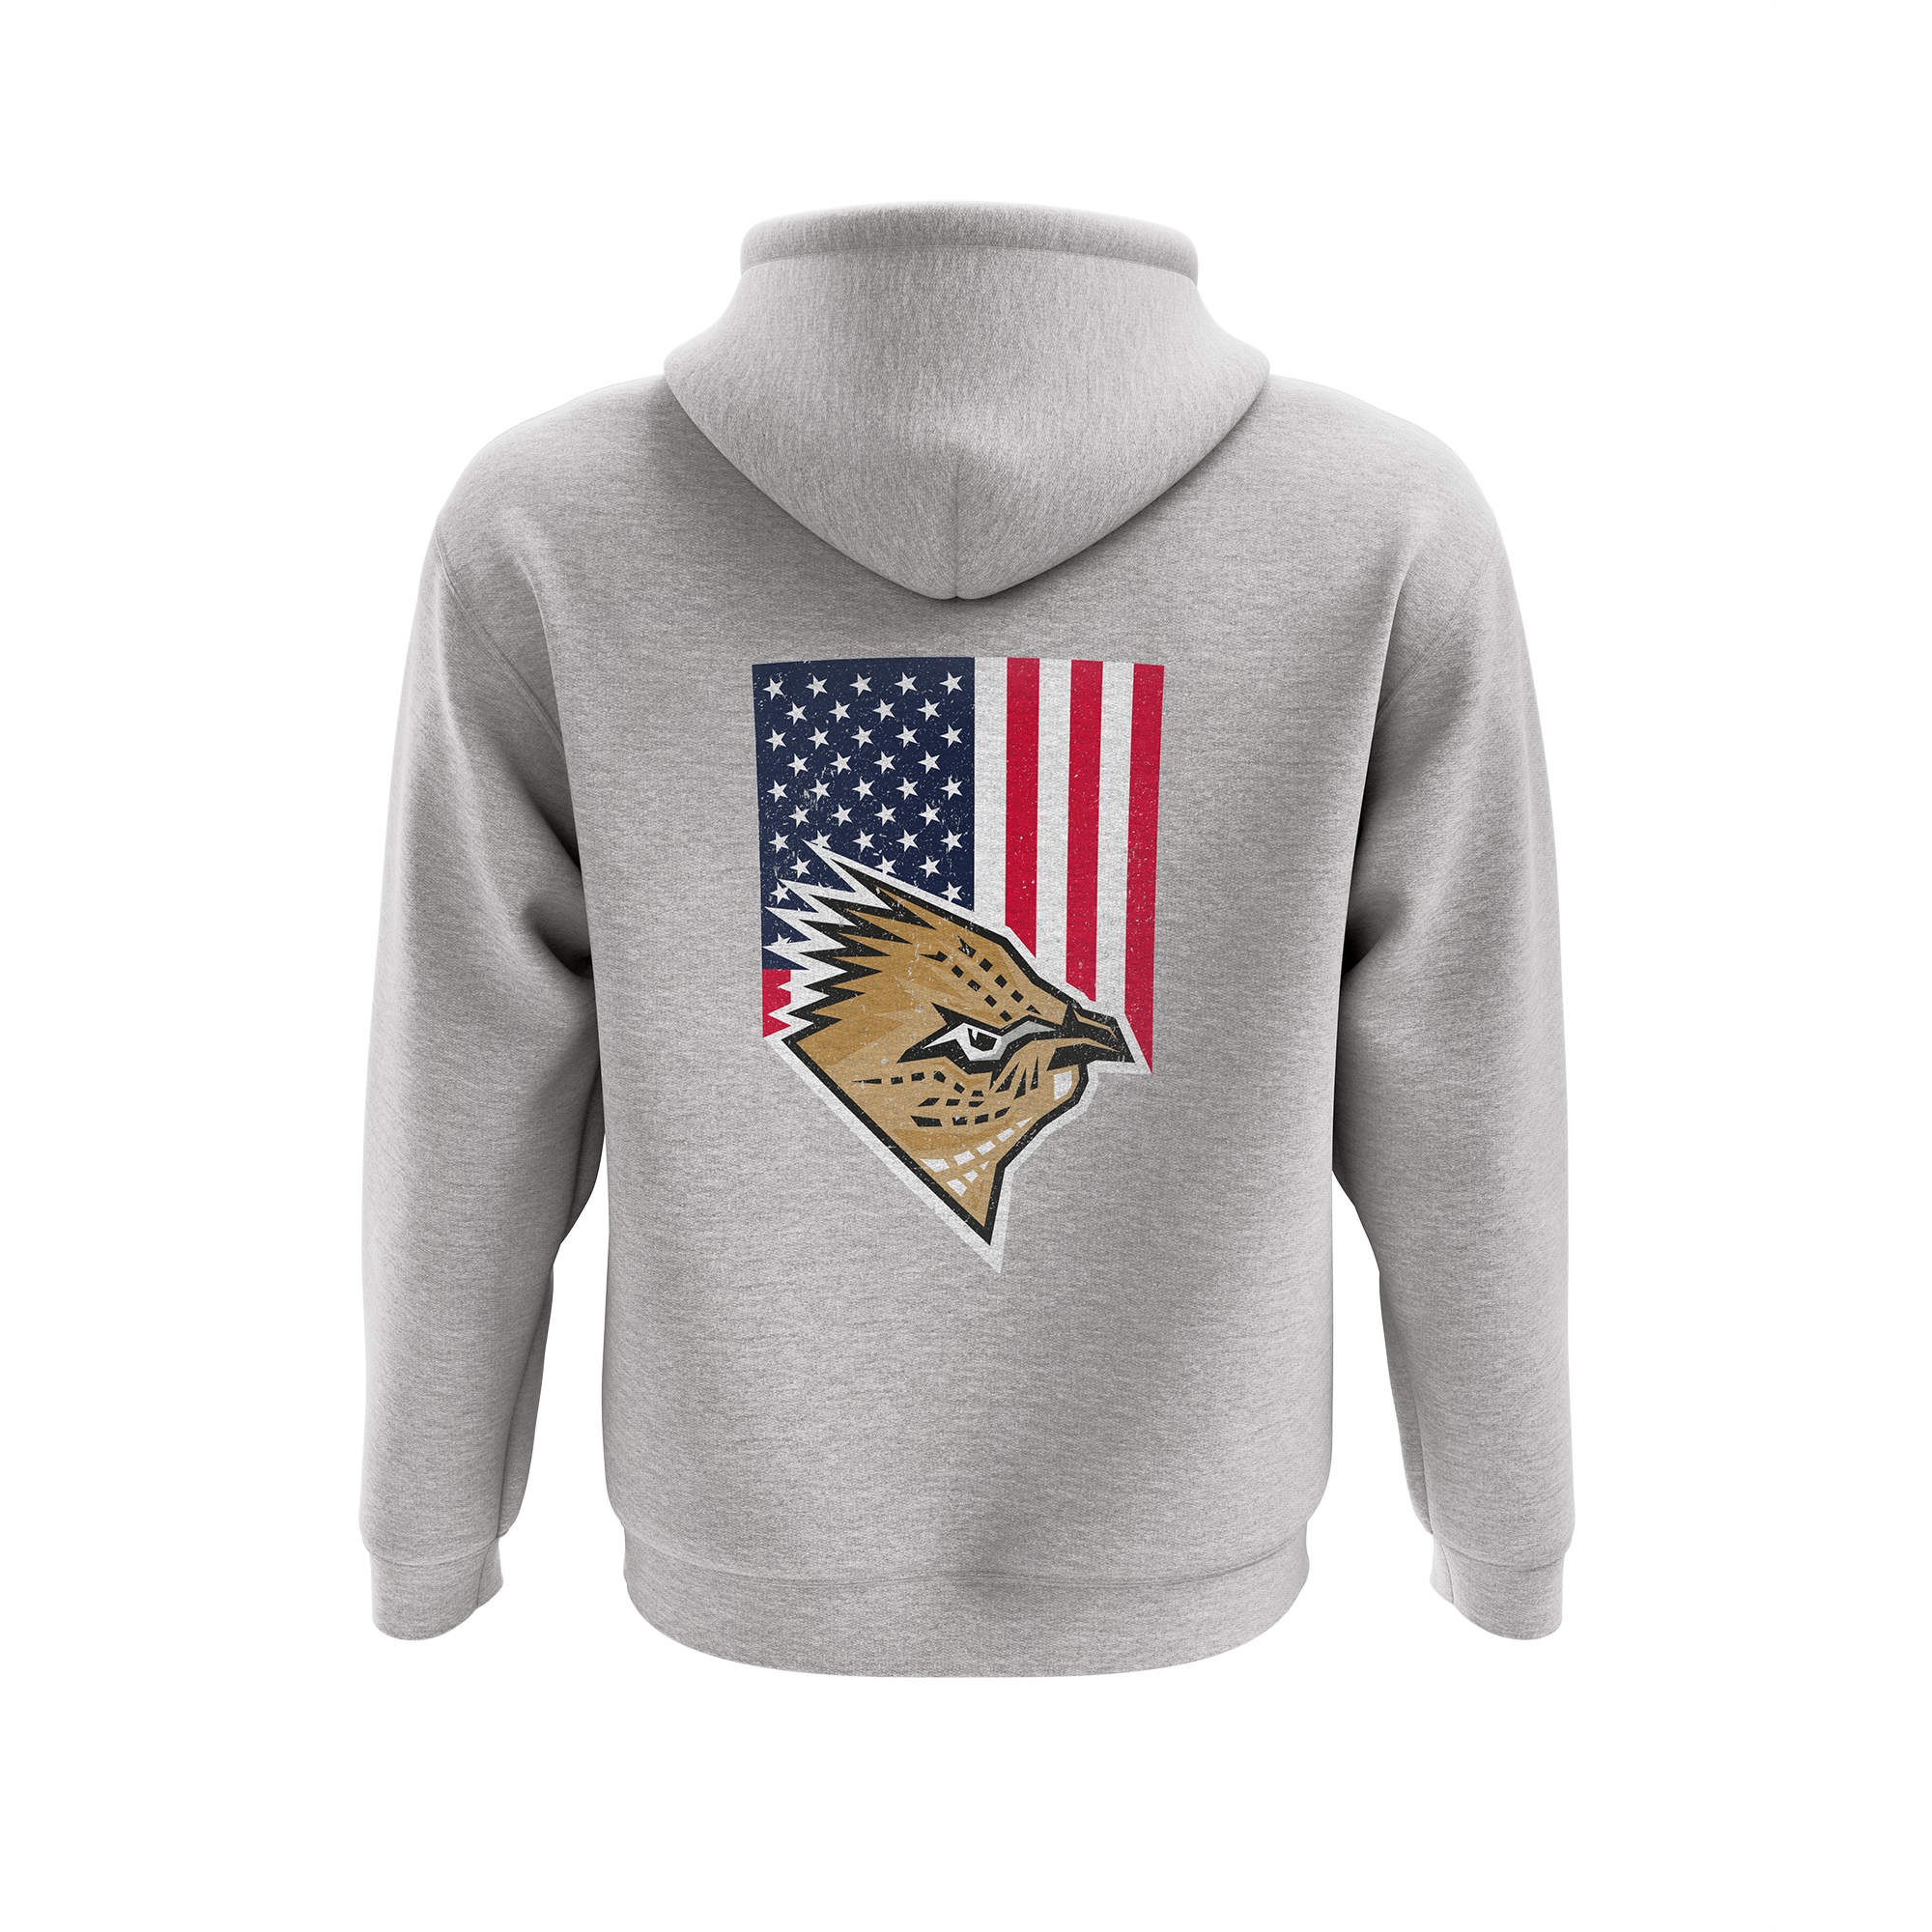 Made in USA - Home Team Series - Grouse Hoodie